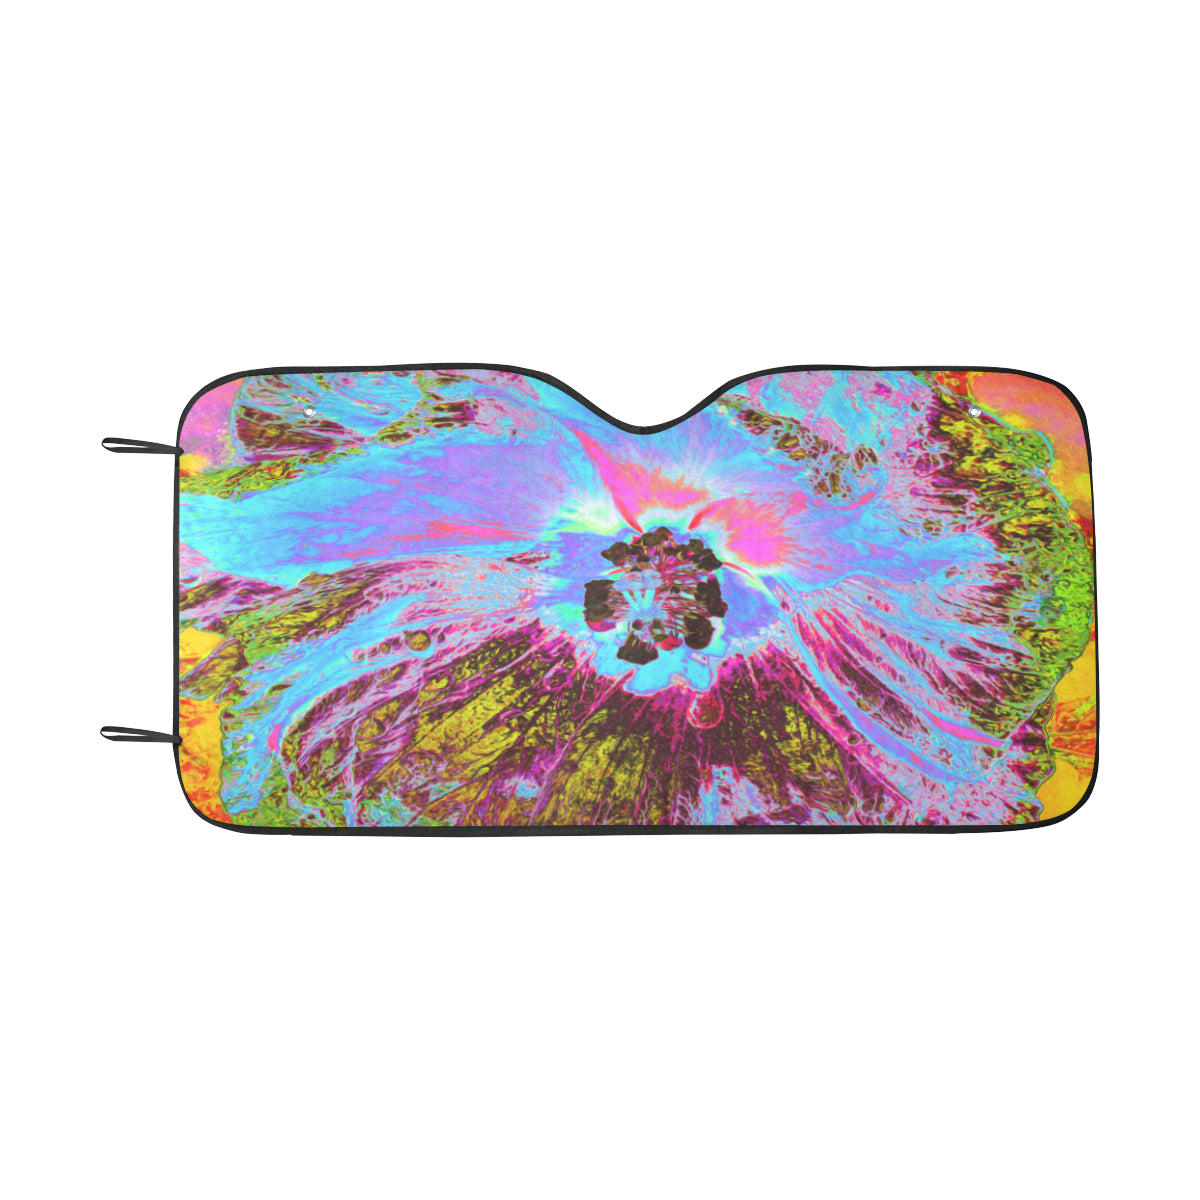 Auto Sun Shade, Psychedelic Cornflower Blue and Magenta Hibiscus